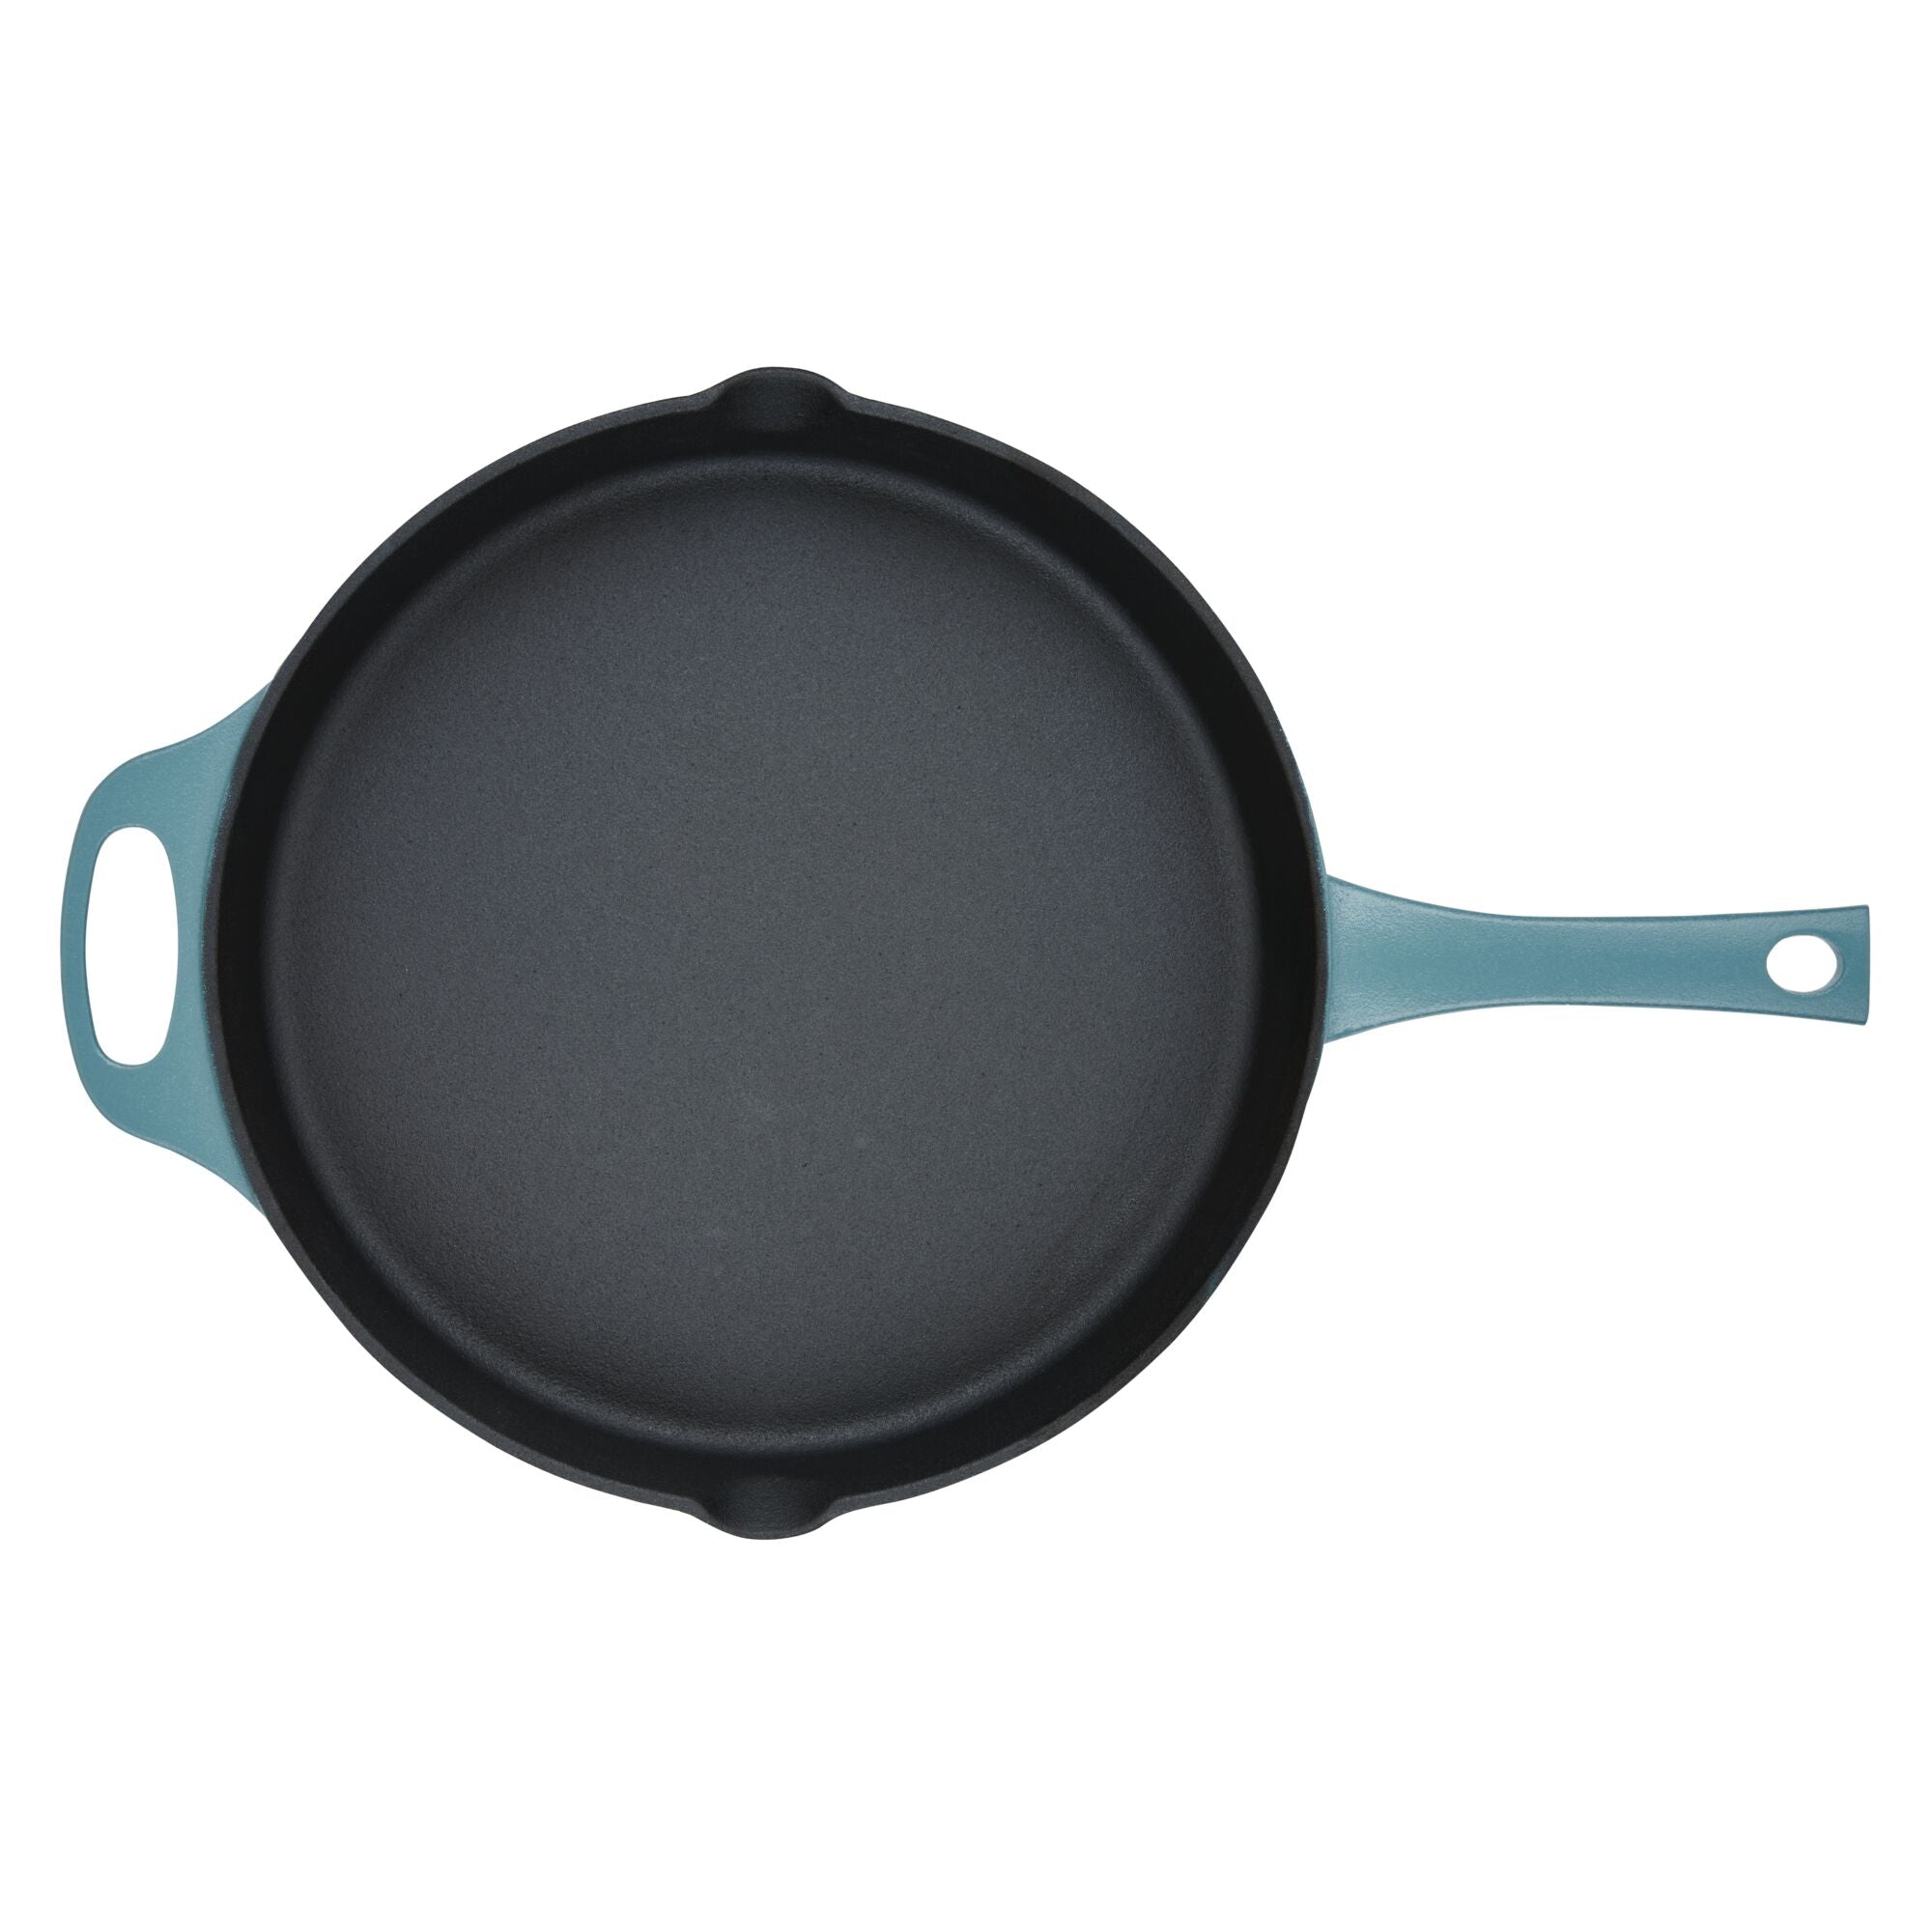 Backcountry Iron 12 inch Round Wasatch Smooth Cast Iron Skillet